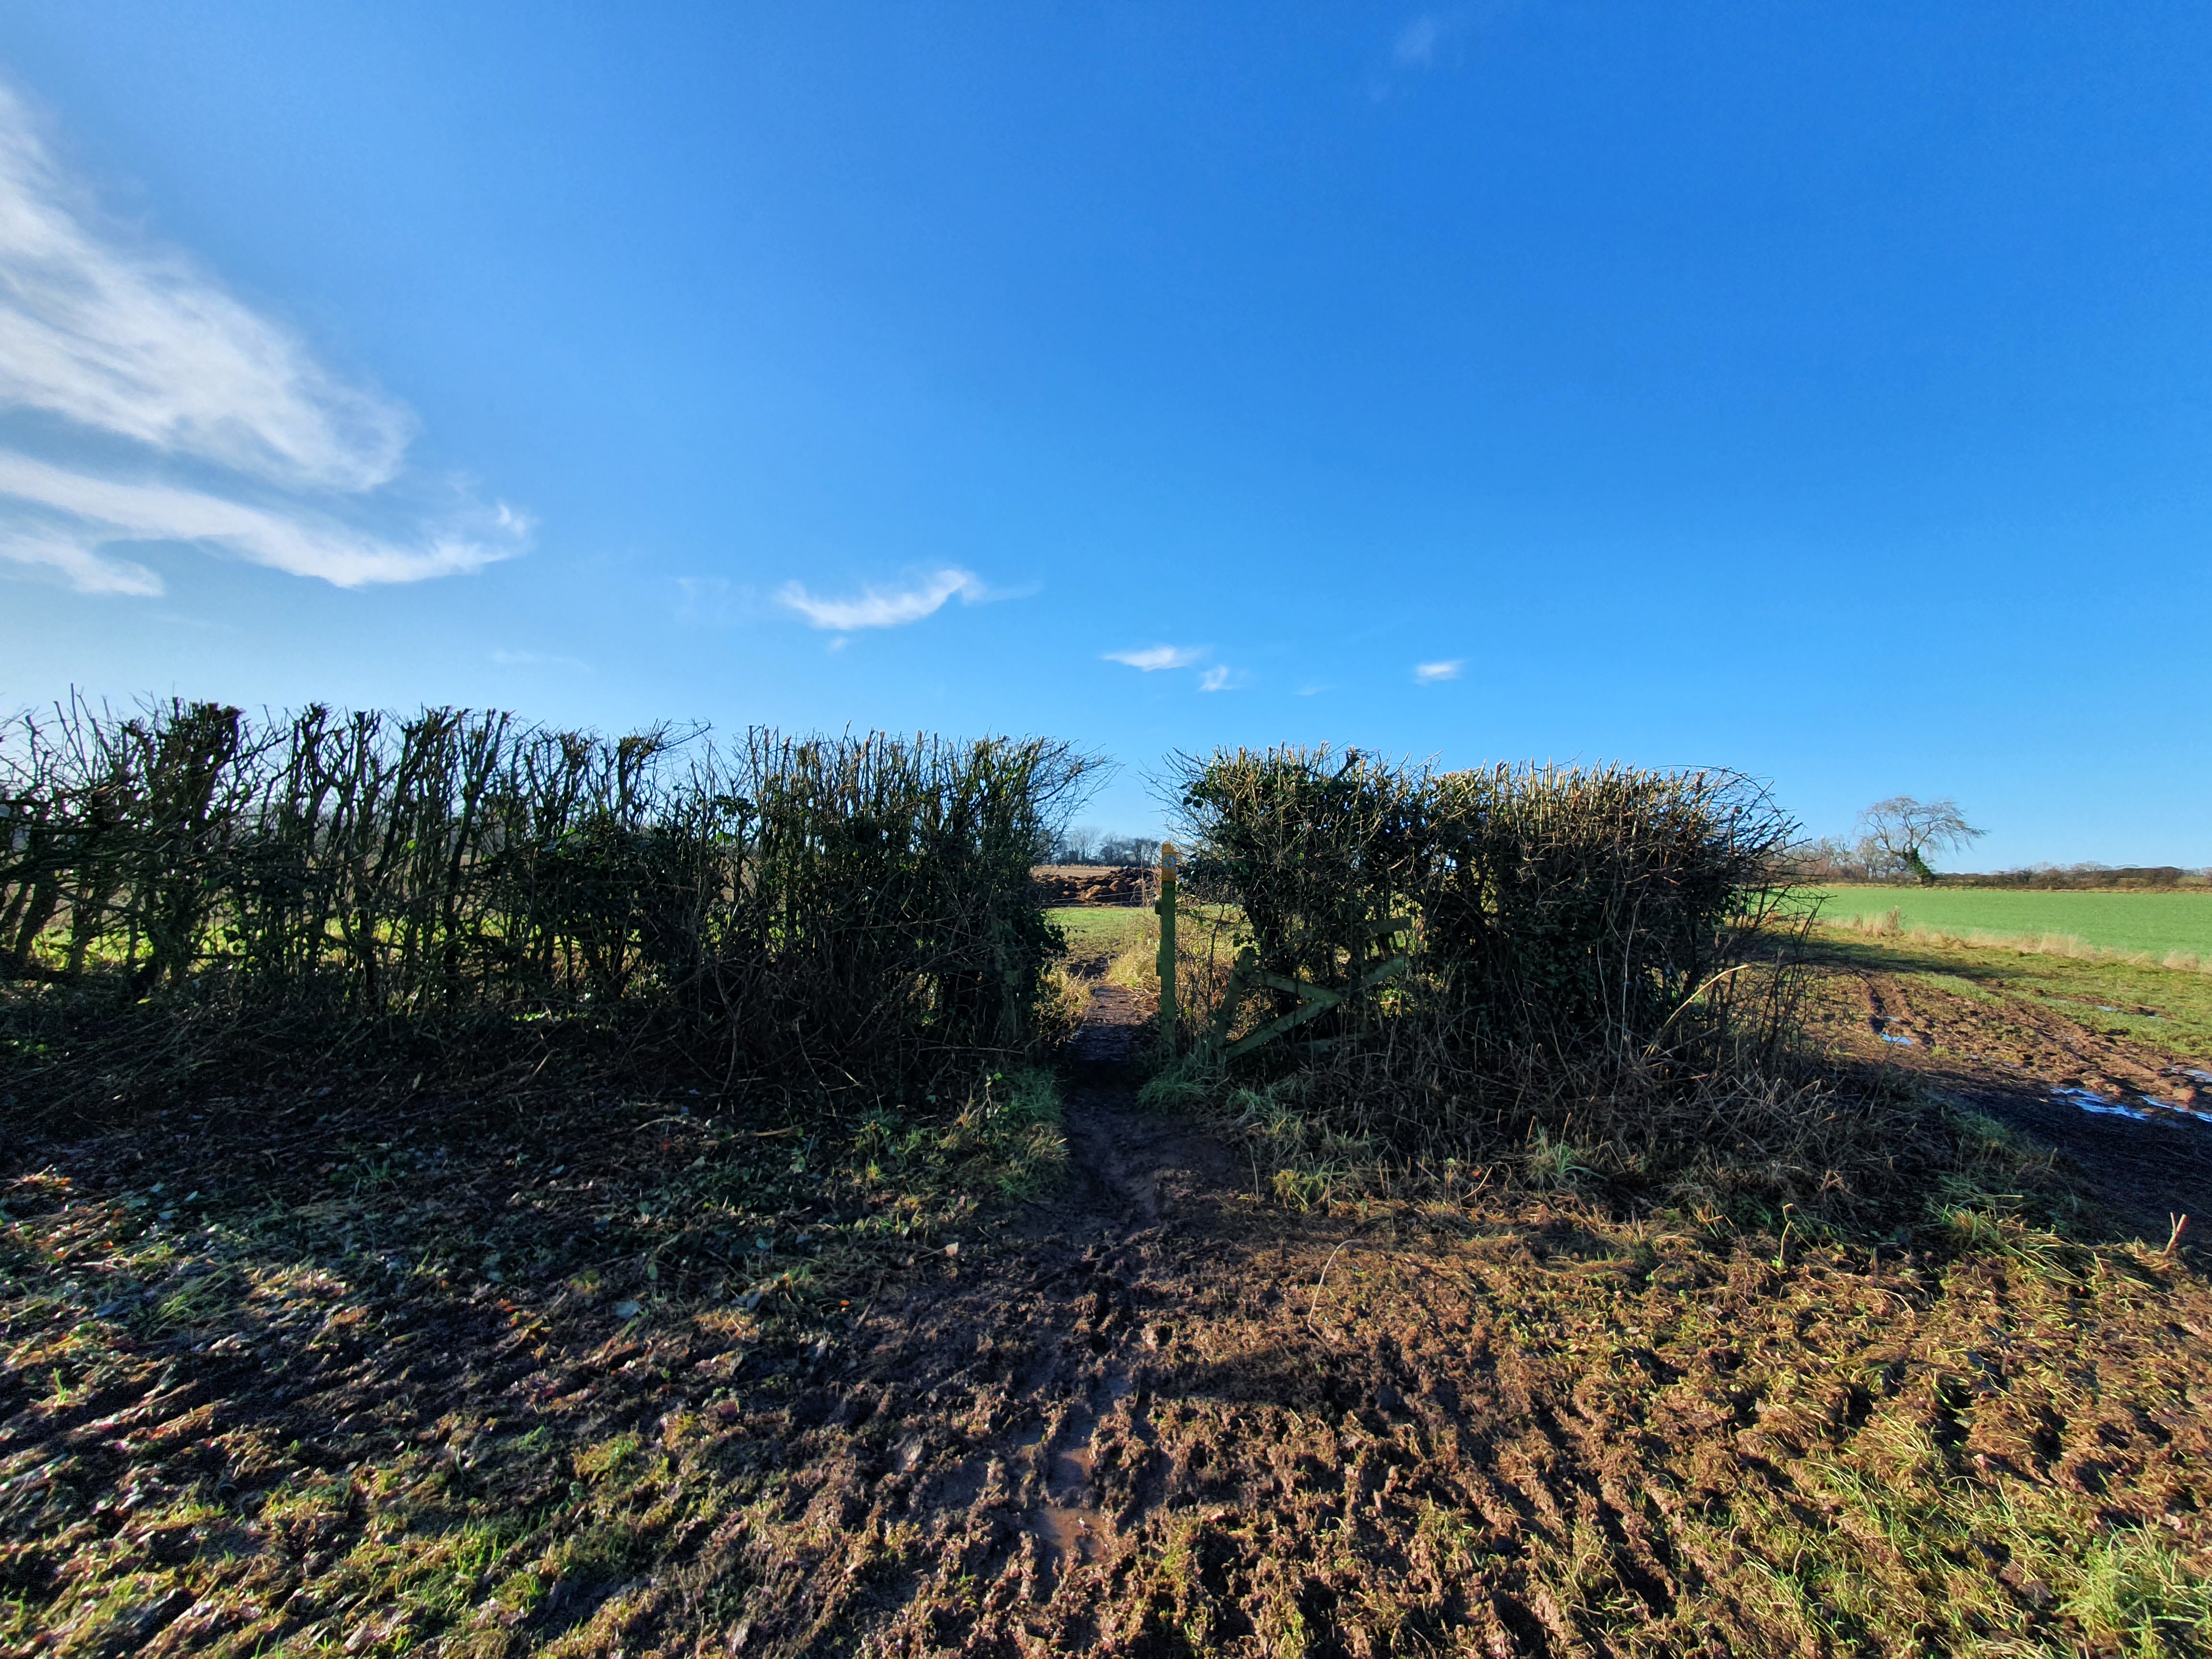 Footpath passes through gap in hedgerow